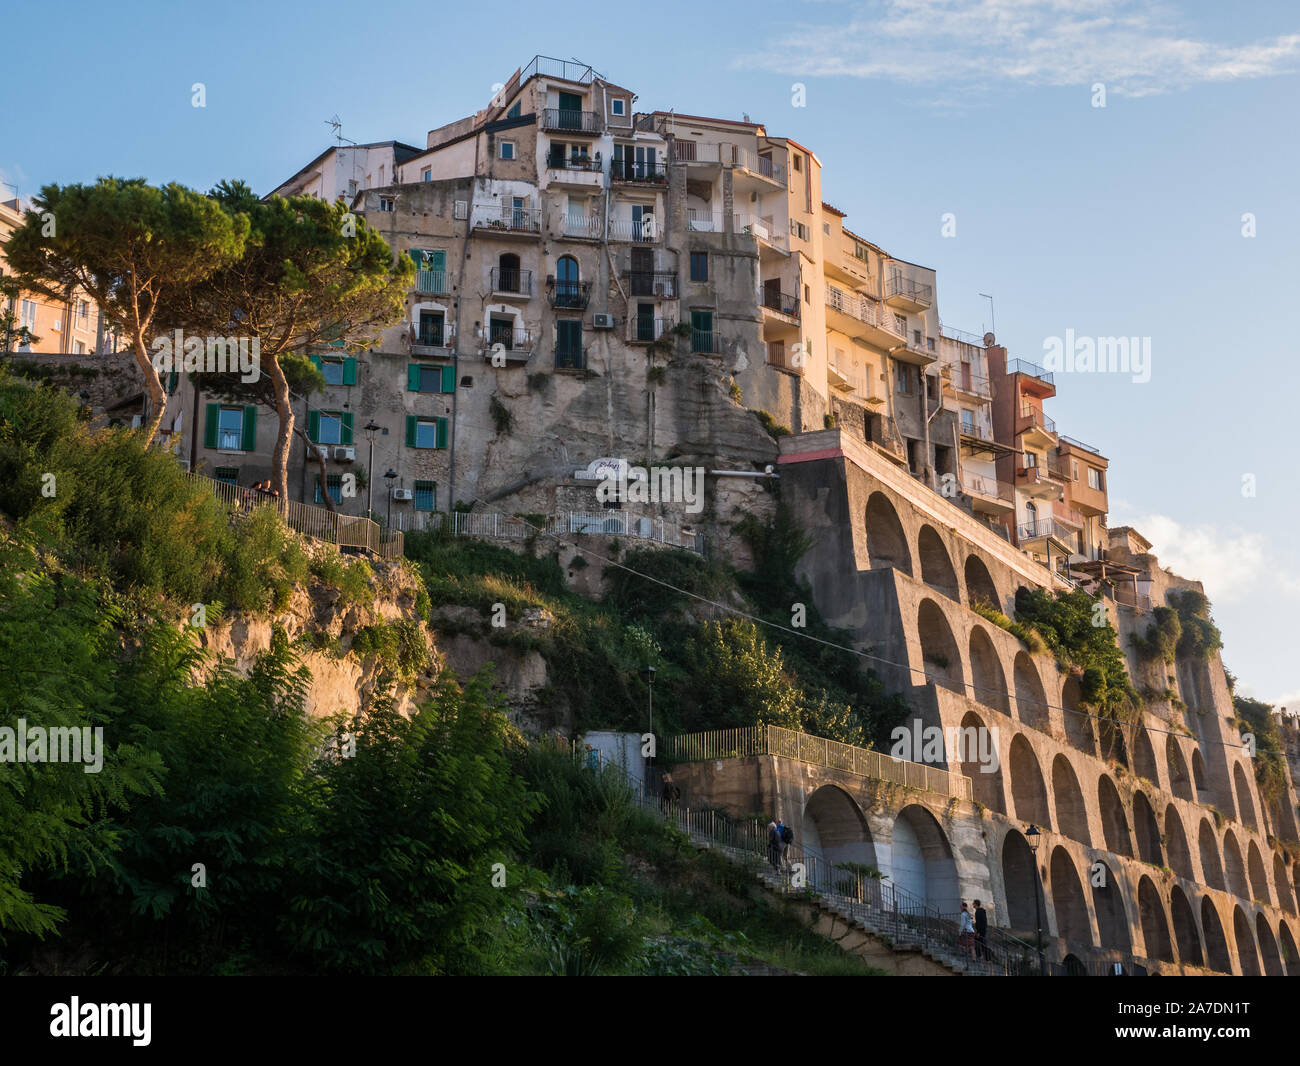 City center of Tropea, Calabria, Italy, old town, historic architecture of big buildings at scliffs with arches and arcades in sunset light from below Stock Photo